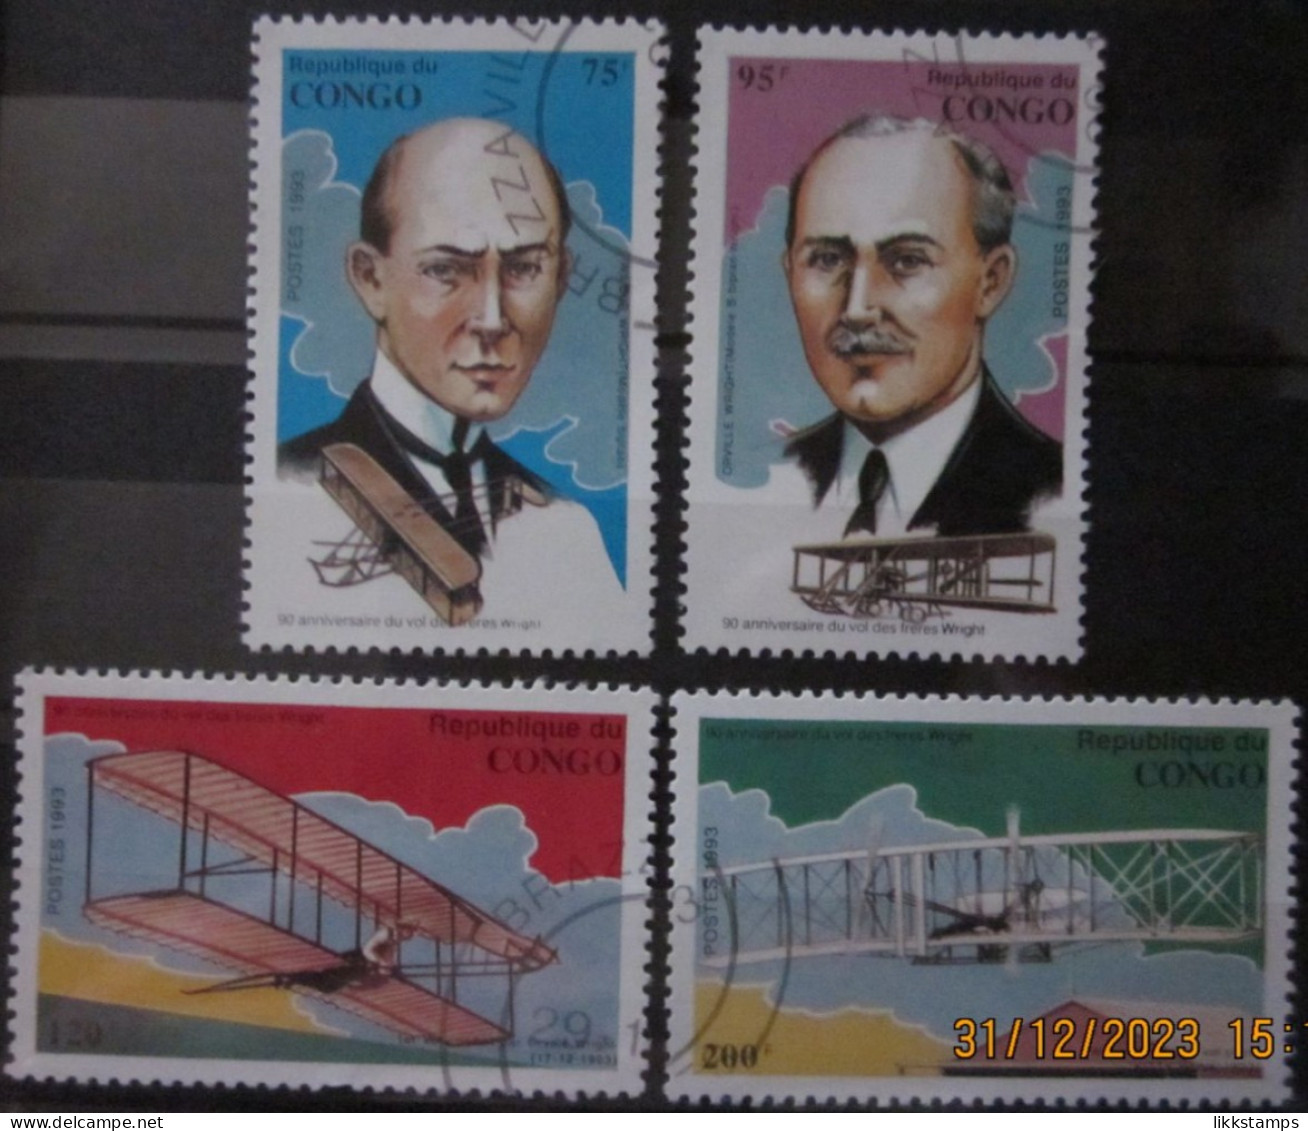 CONGO 17/12/1993 ~ THE 90th ANNIVERSARY OF THE FIRST POWERED FLIGHT. ~  VFU #03087 - Used